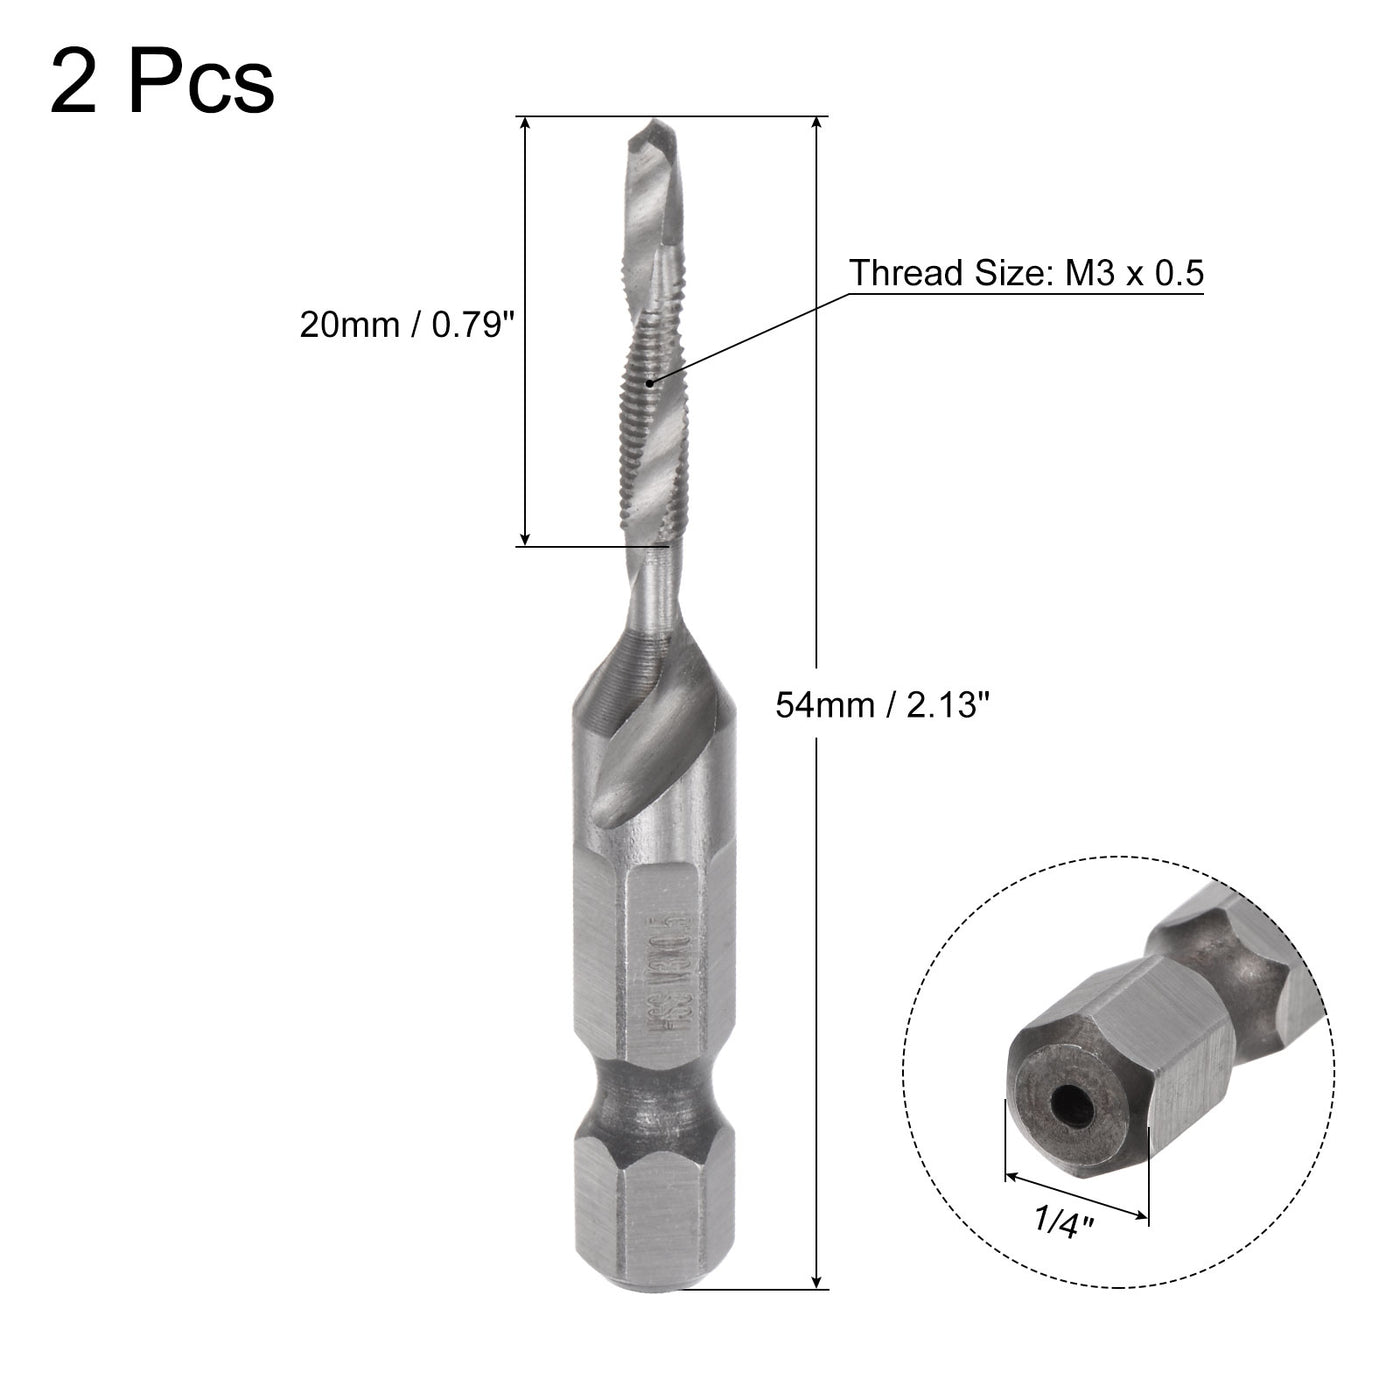 Uxcell Uxcell 1/4" Shank M5x0.8 Uncoated High Speed Steel 4341 Combination Drill Tap Bit 2pcs